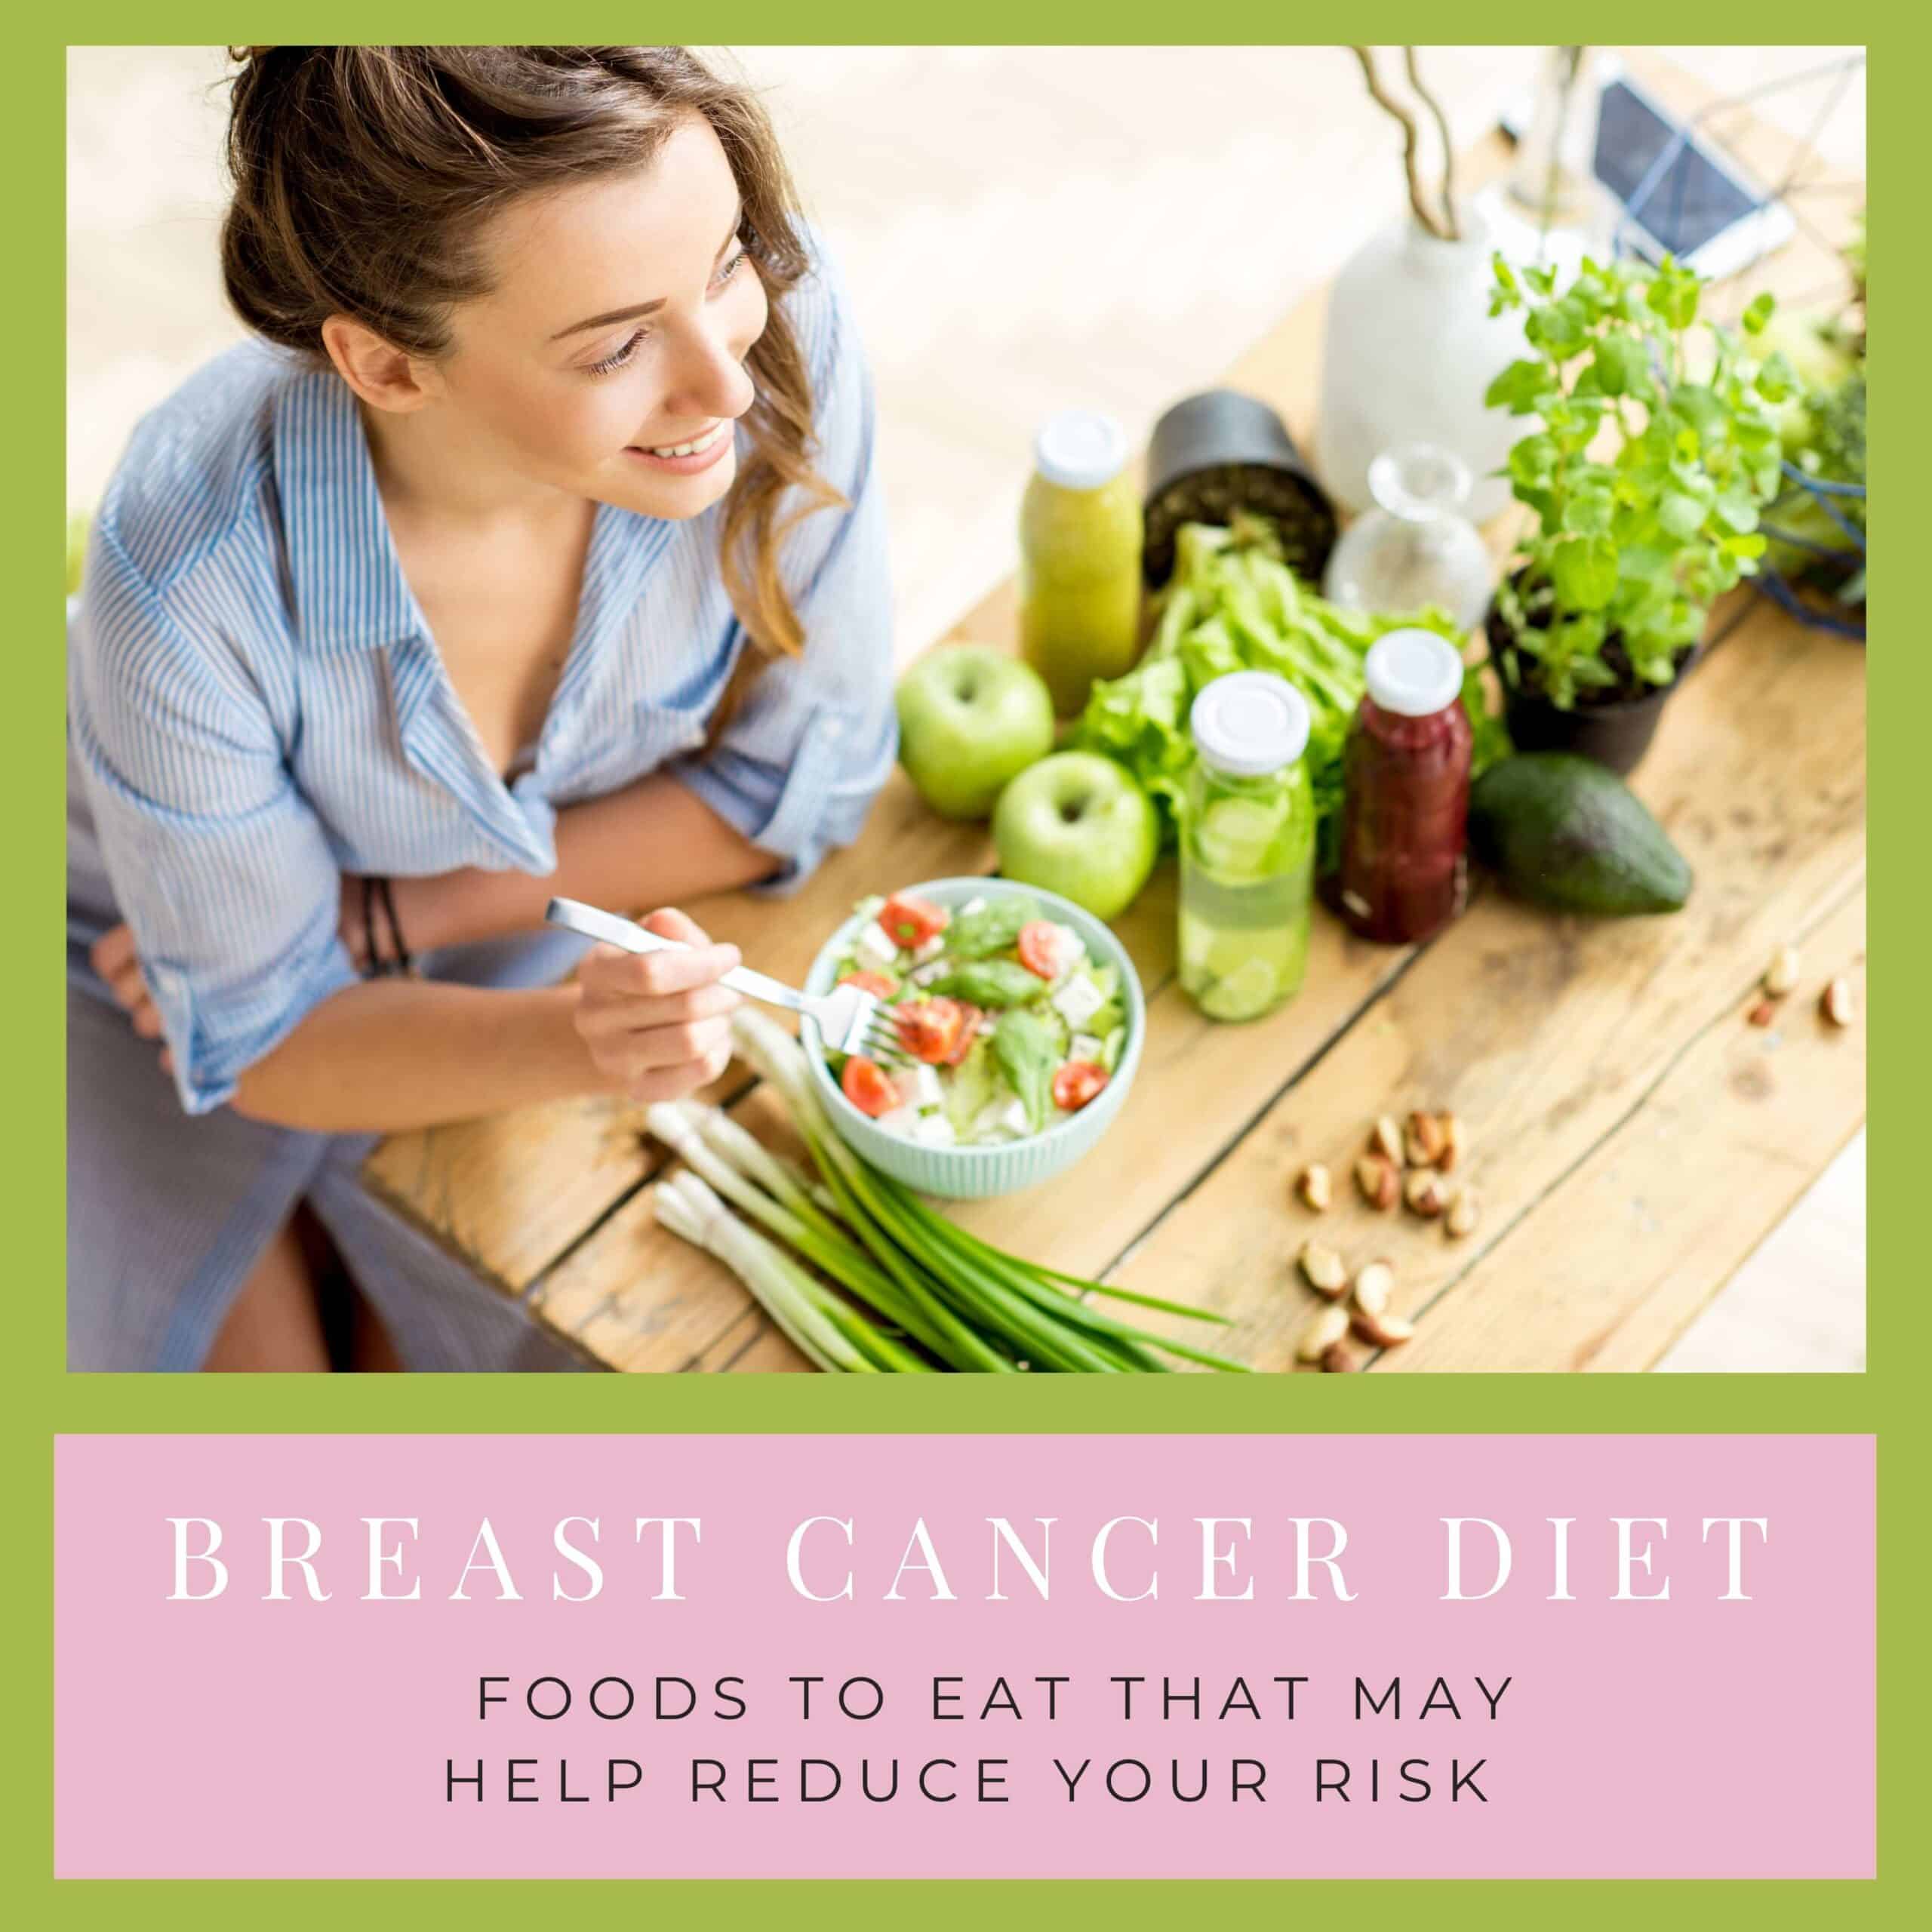 The Breast Cancer Diet  The Healthy Life Foundation